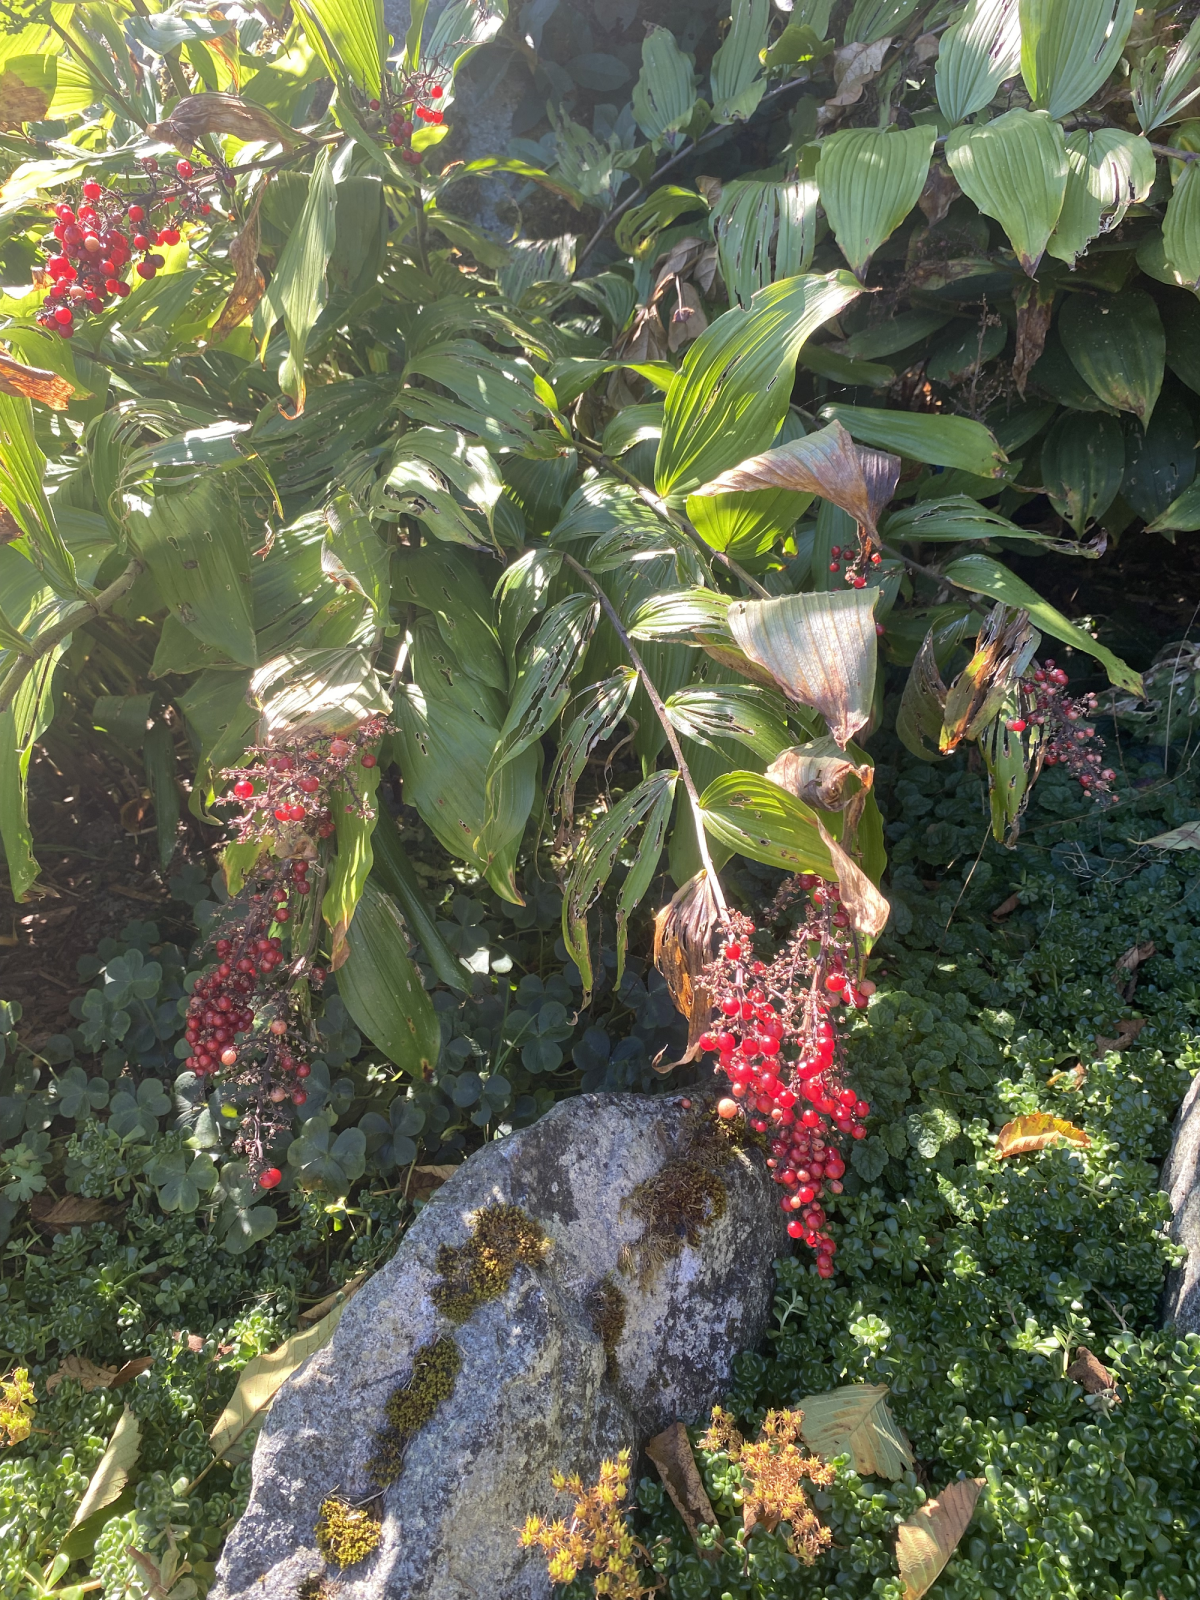 Plant with red berries.